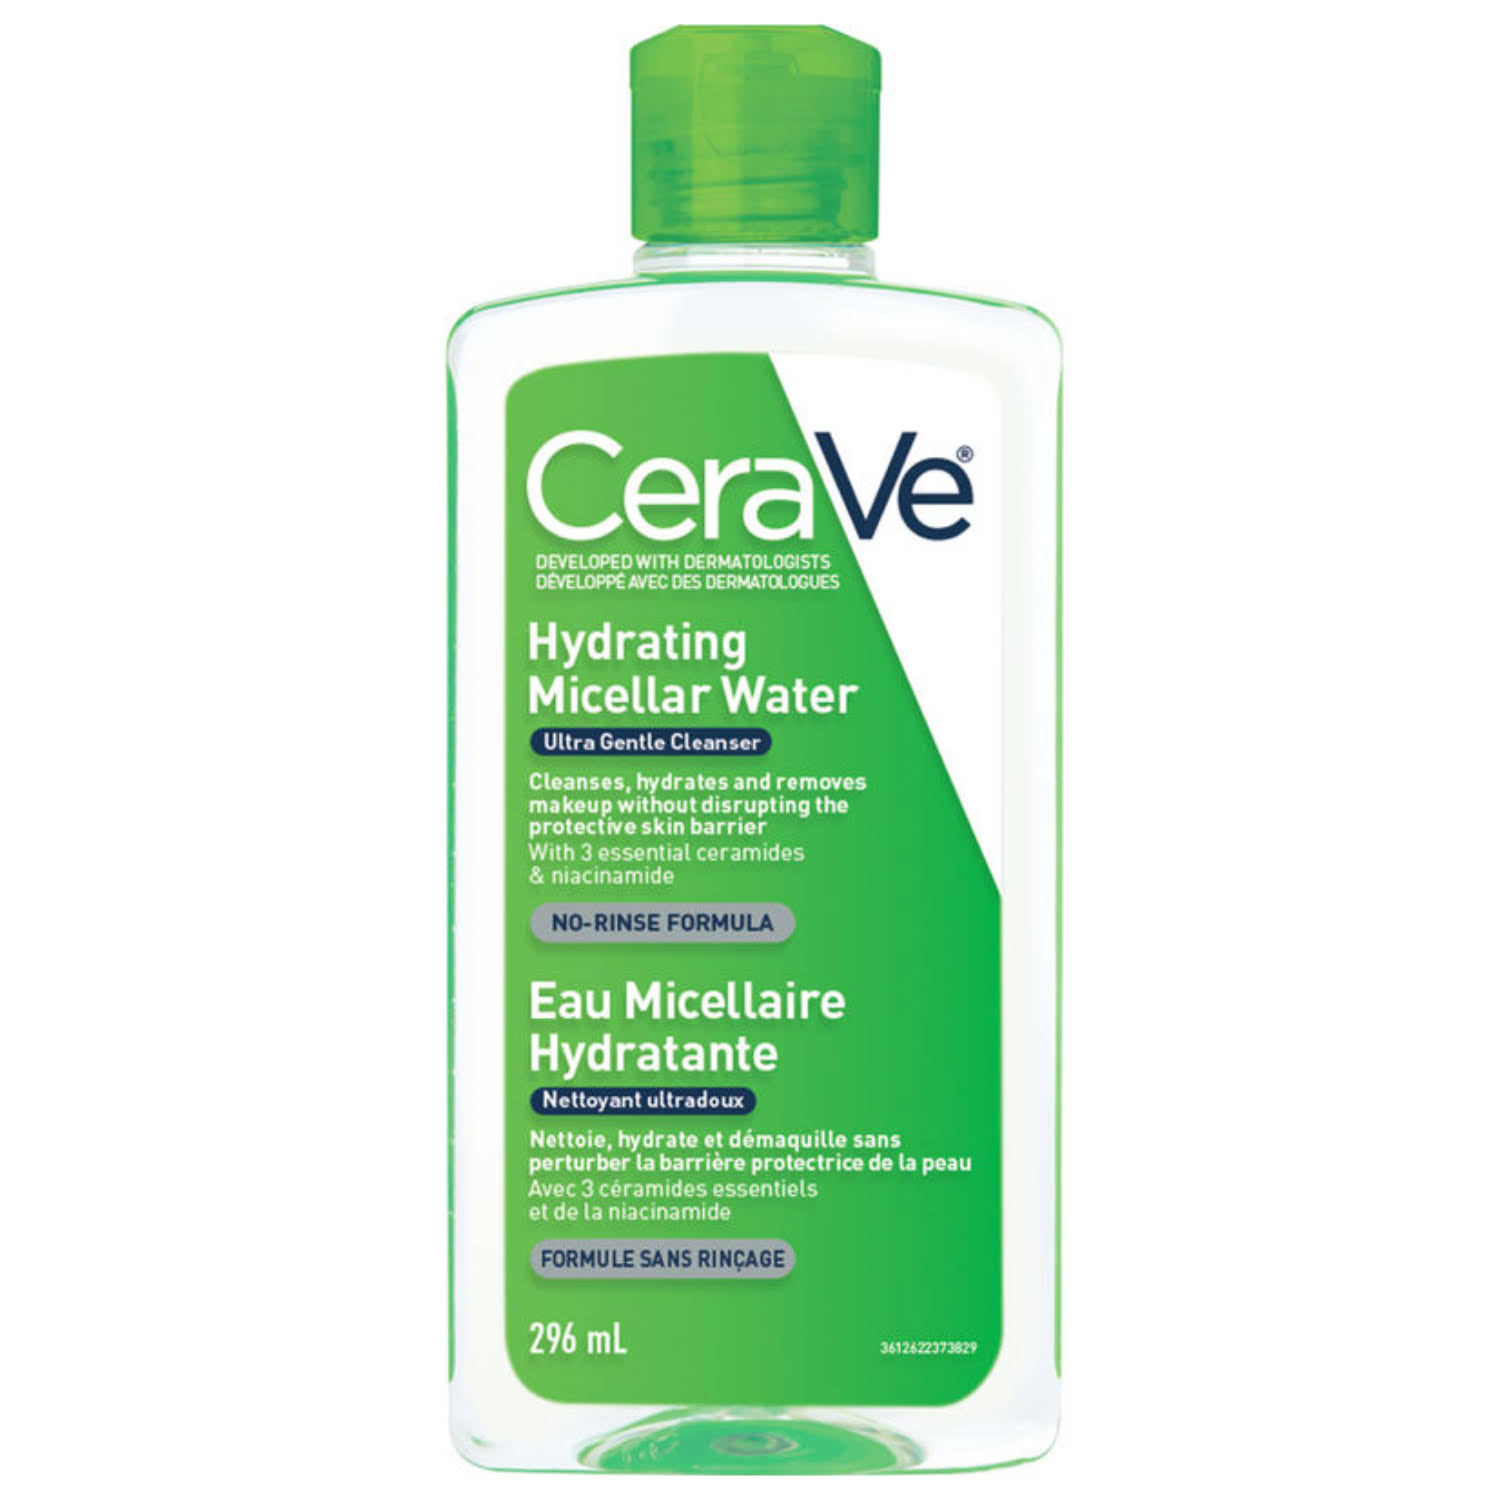 CeraVe Hydrating Micellar Water 296ml